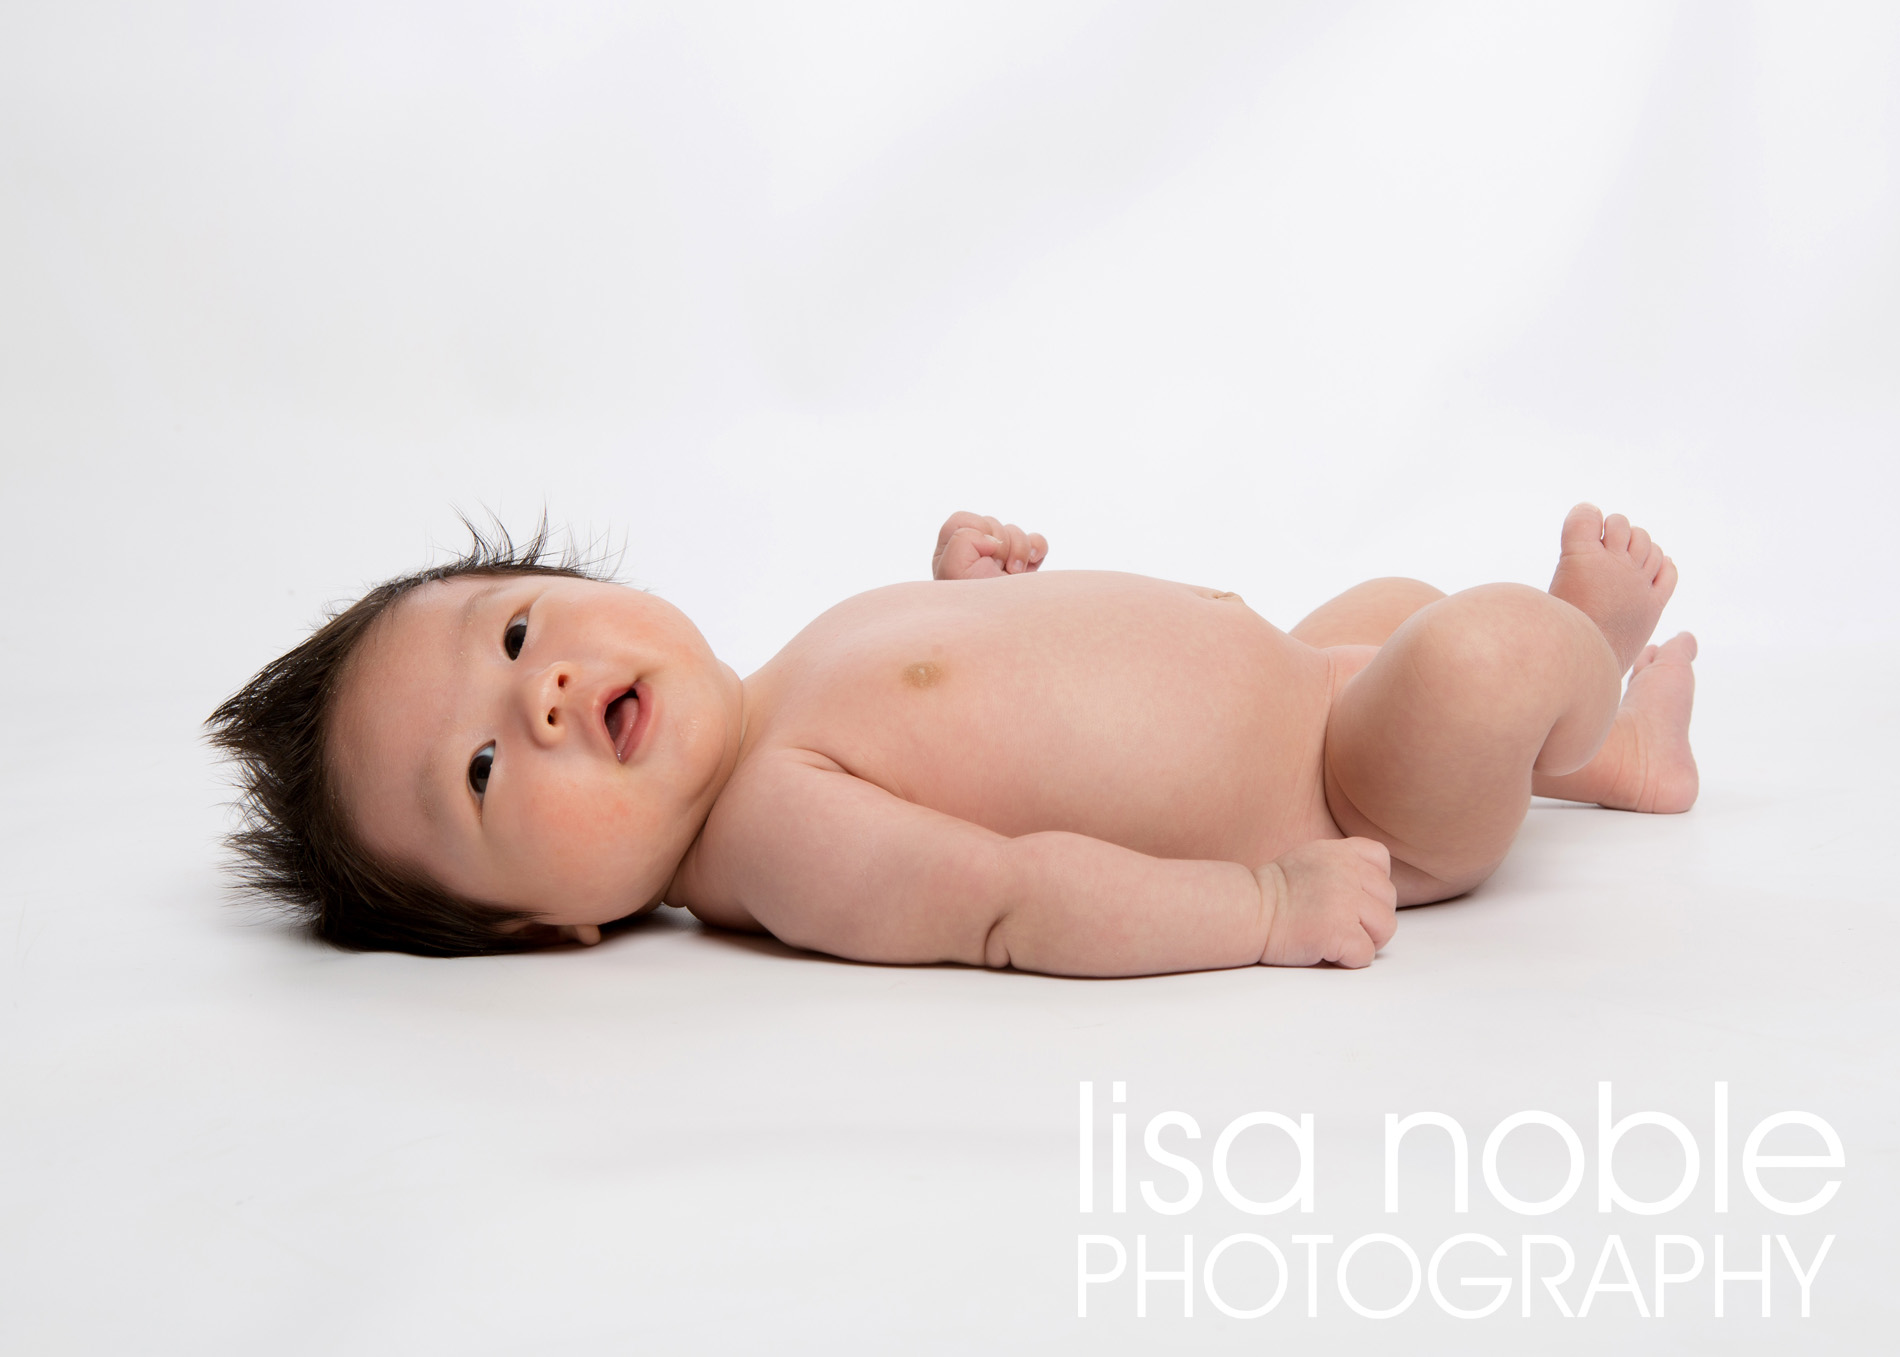 Bay Area Professional Newborn Baby Photography by Lisa Noble